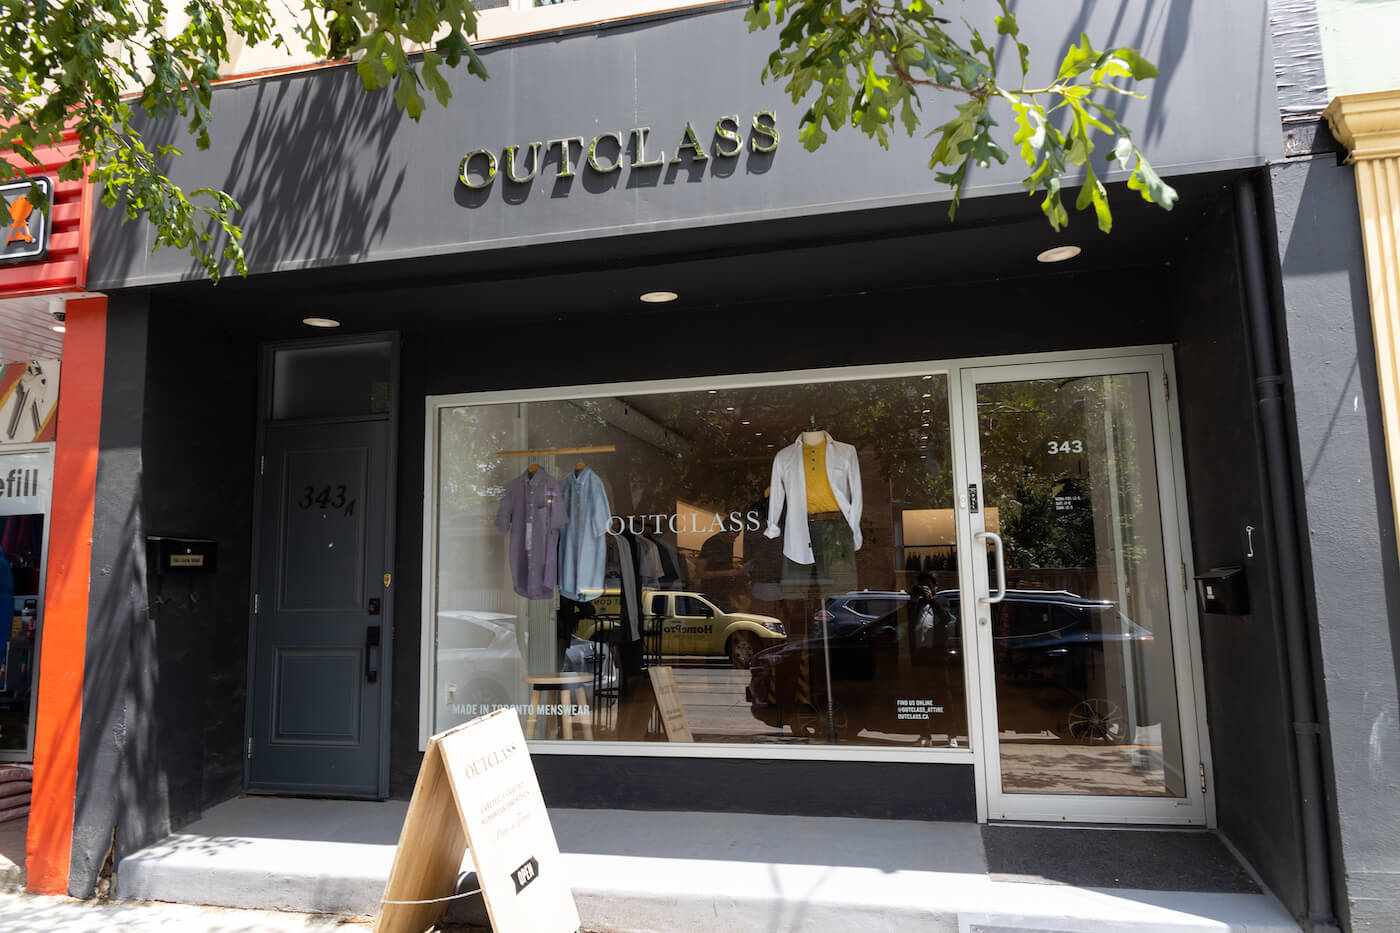 Things to do in Roncesvalles - Outclass clothing